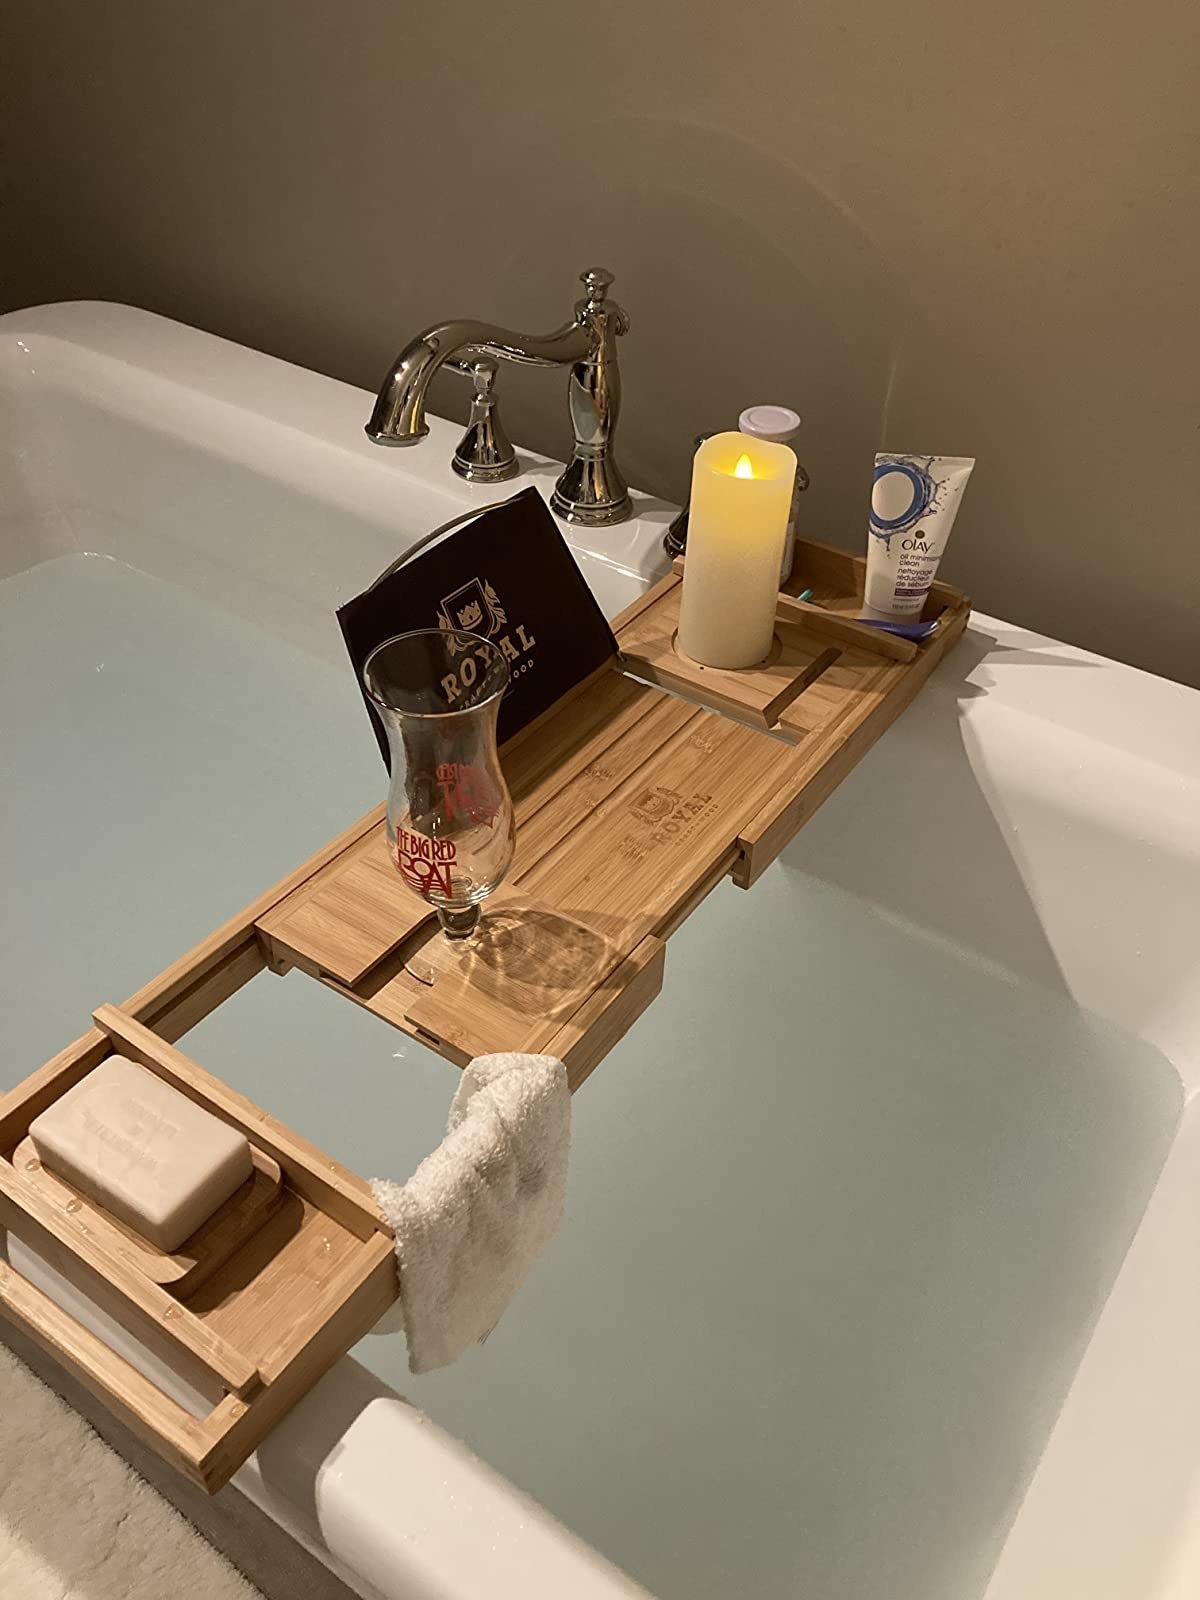 A bamboo tray sitting on top of a bathtub filled with water